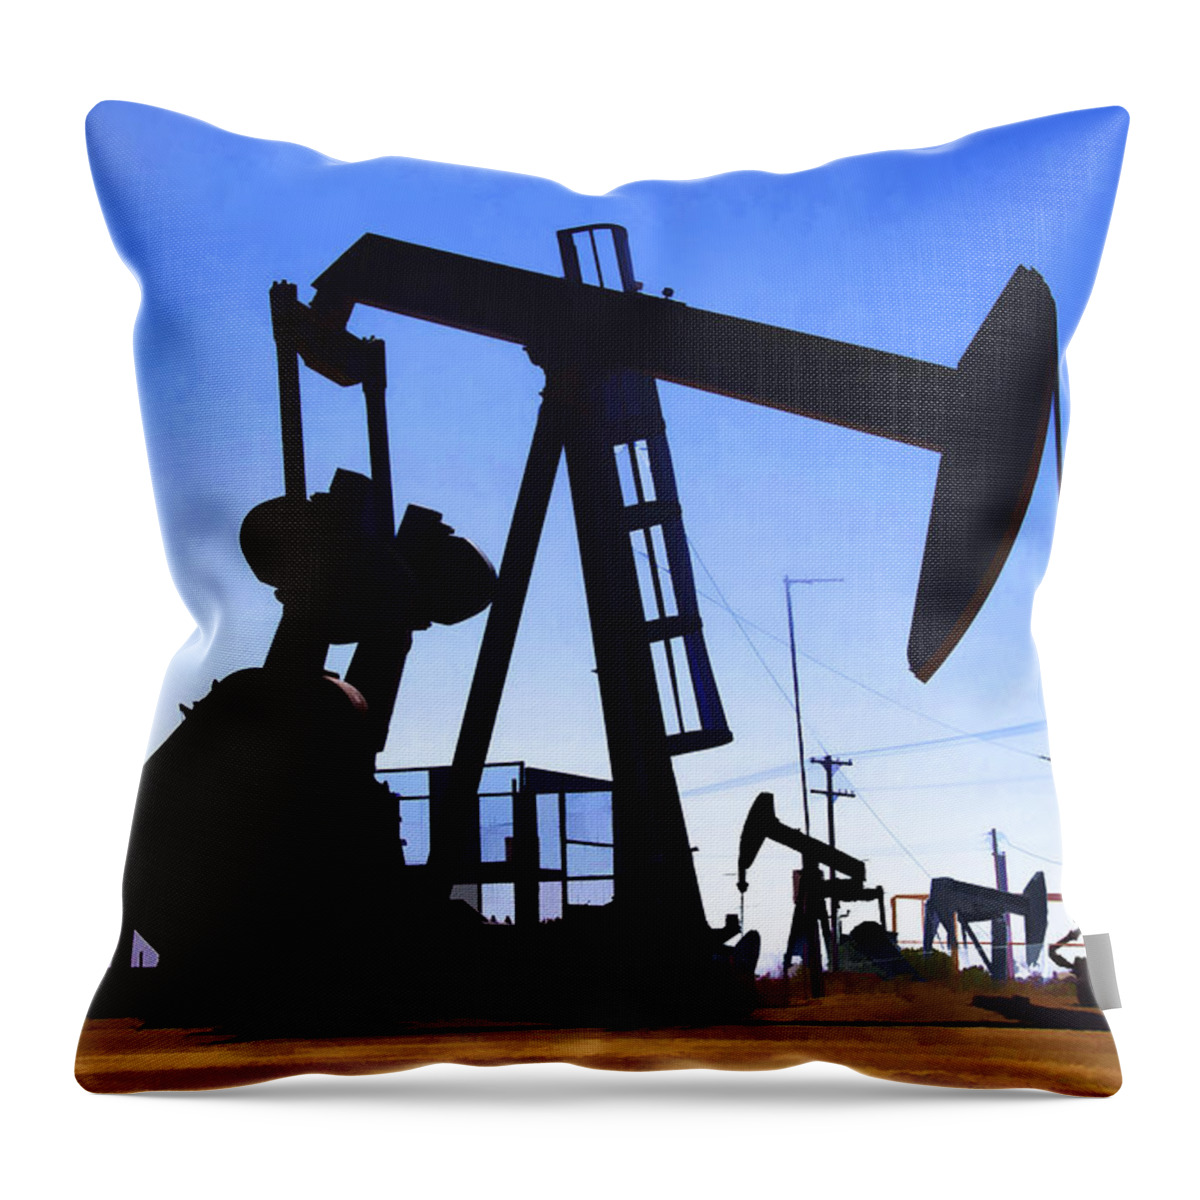 Oil Fields Throw Pillow featuring the photograph Oil Fields by Chuck Staley